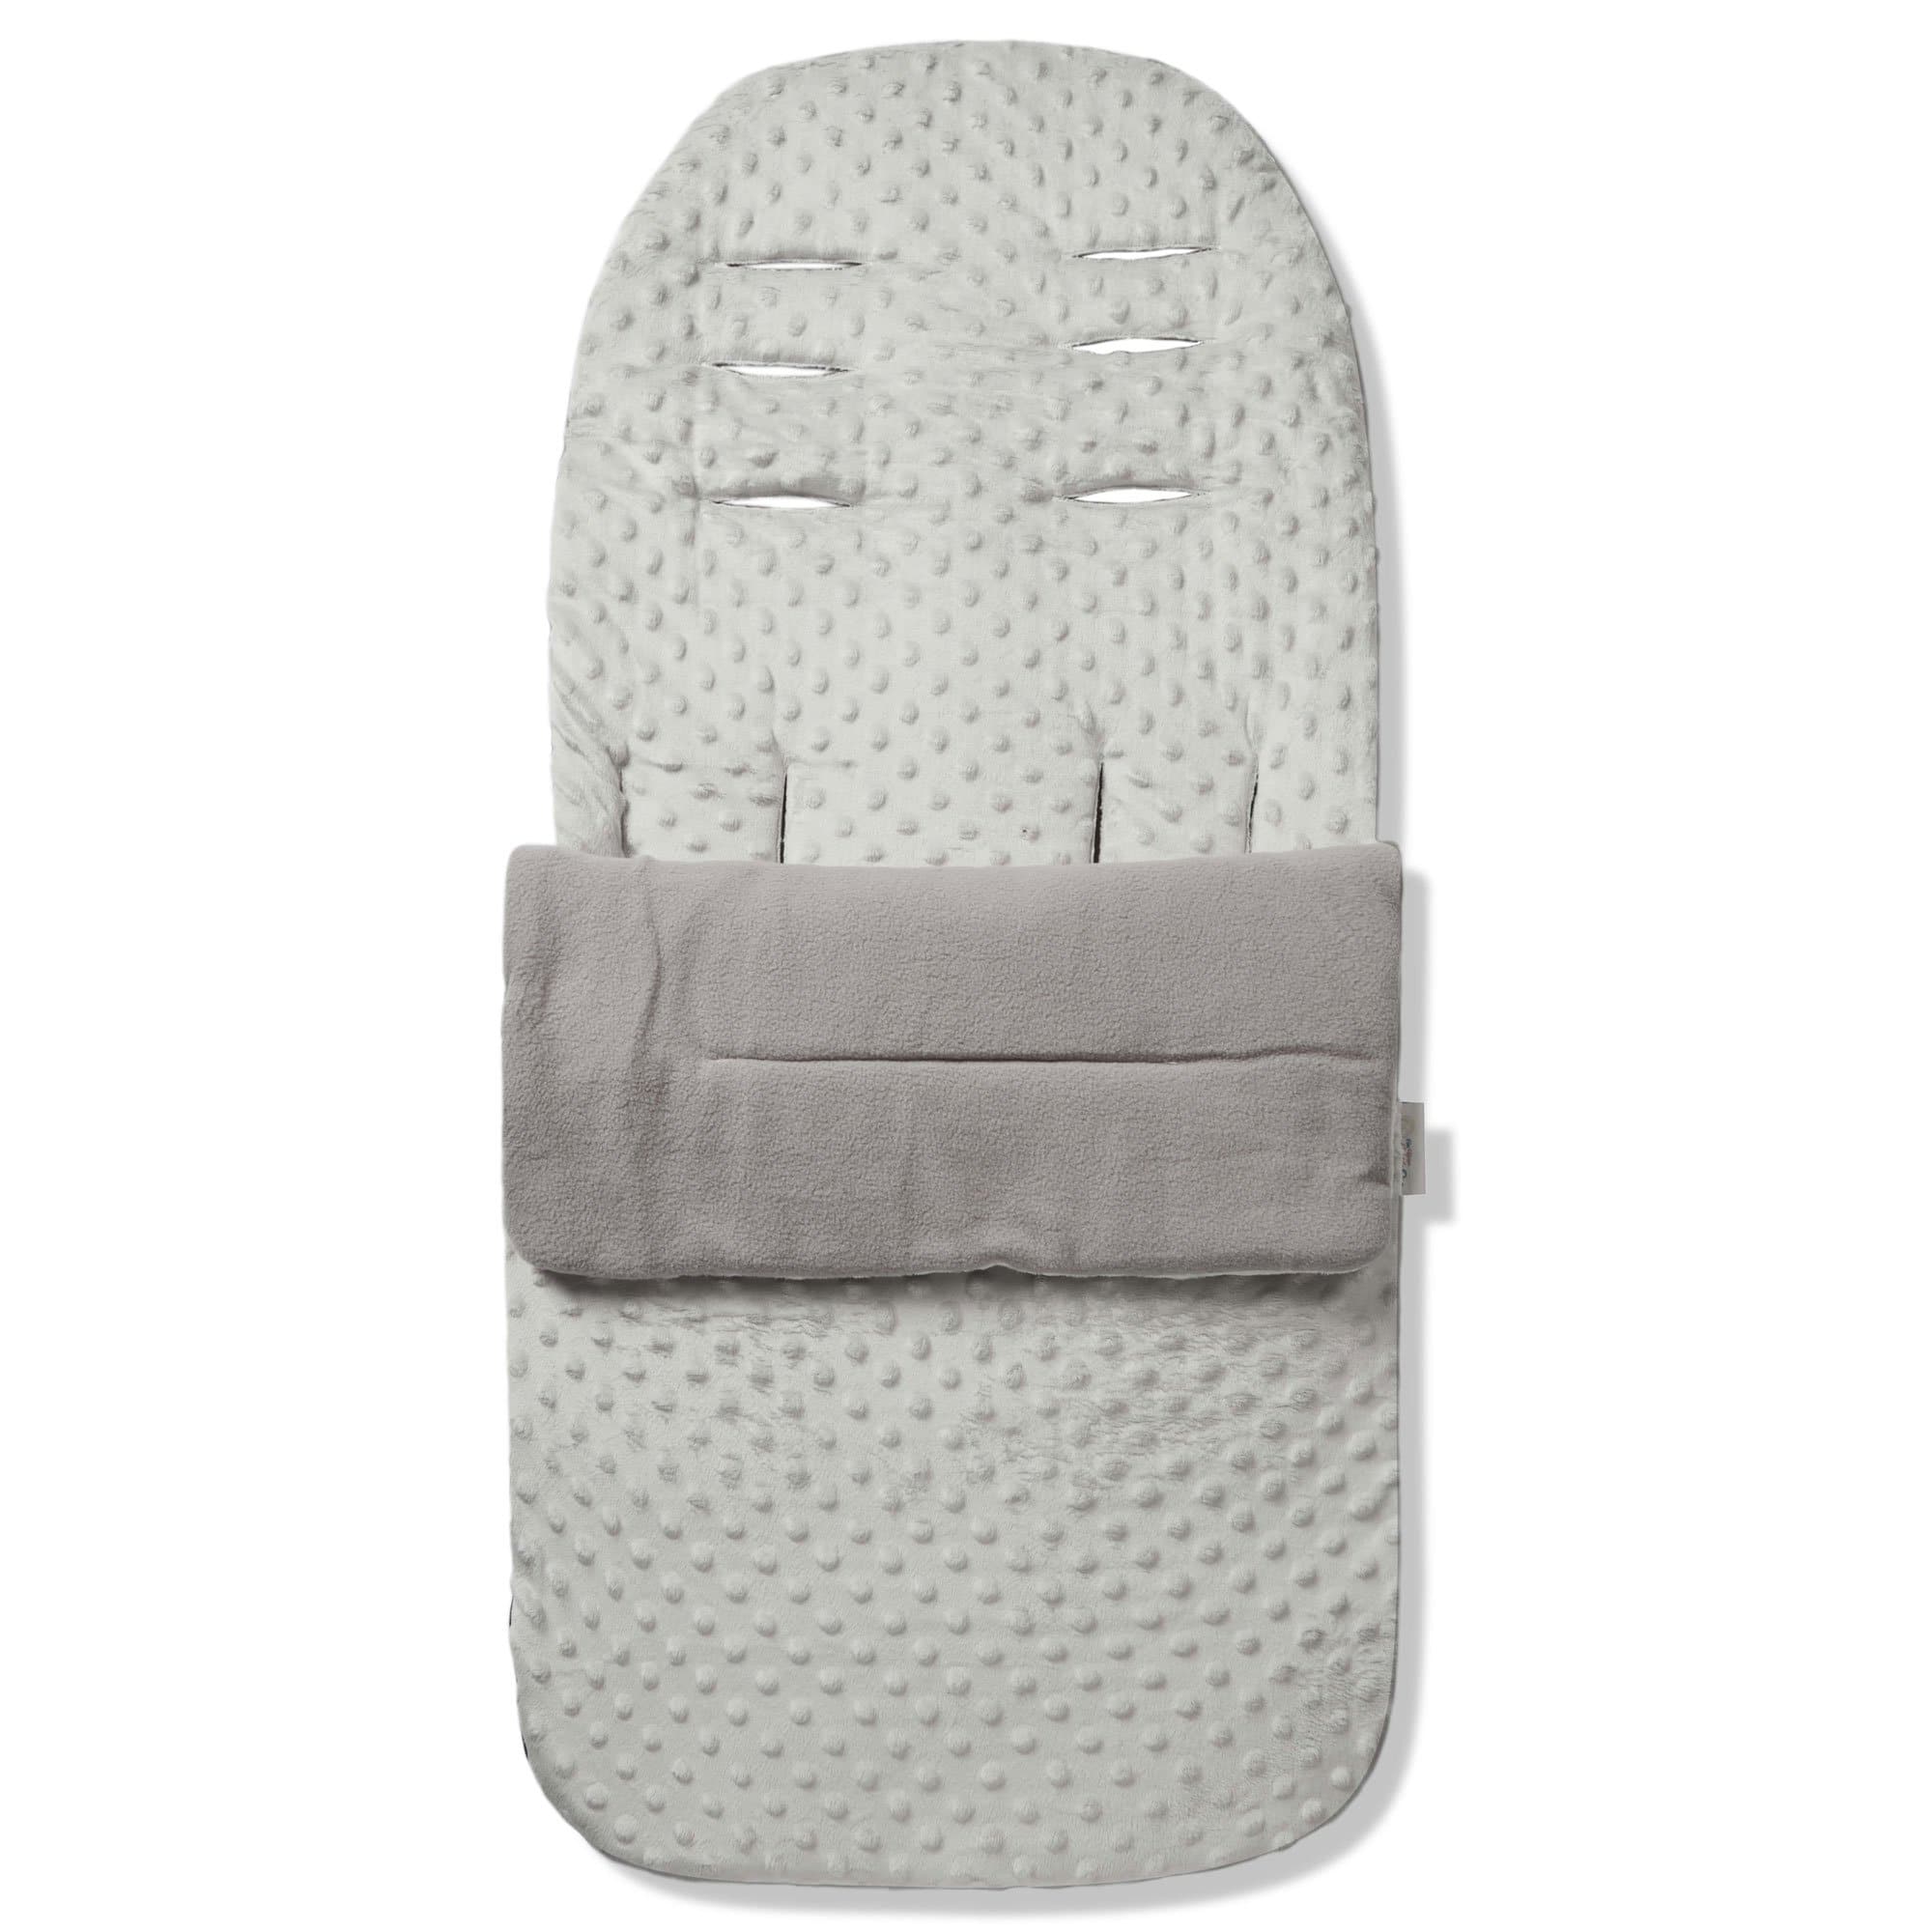 Dimple Footmuff / Cosy Toes Compatible with ABC Design - Grey / Fits All Models | For Your Little One